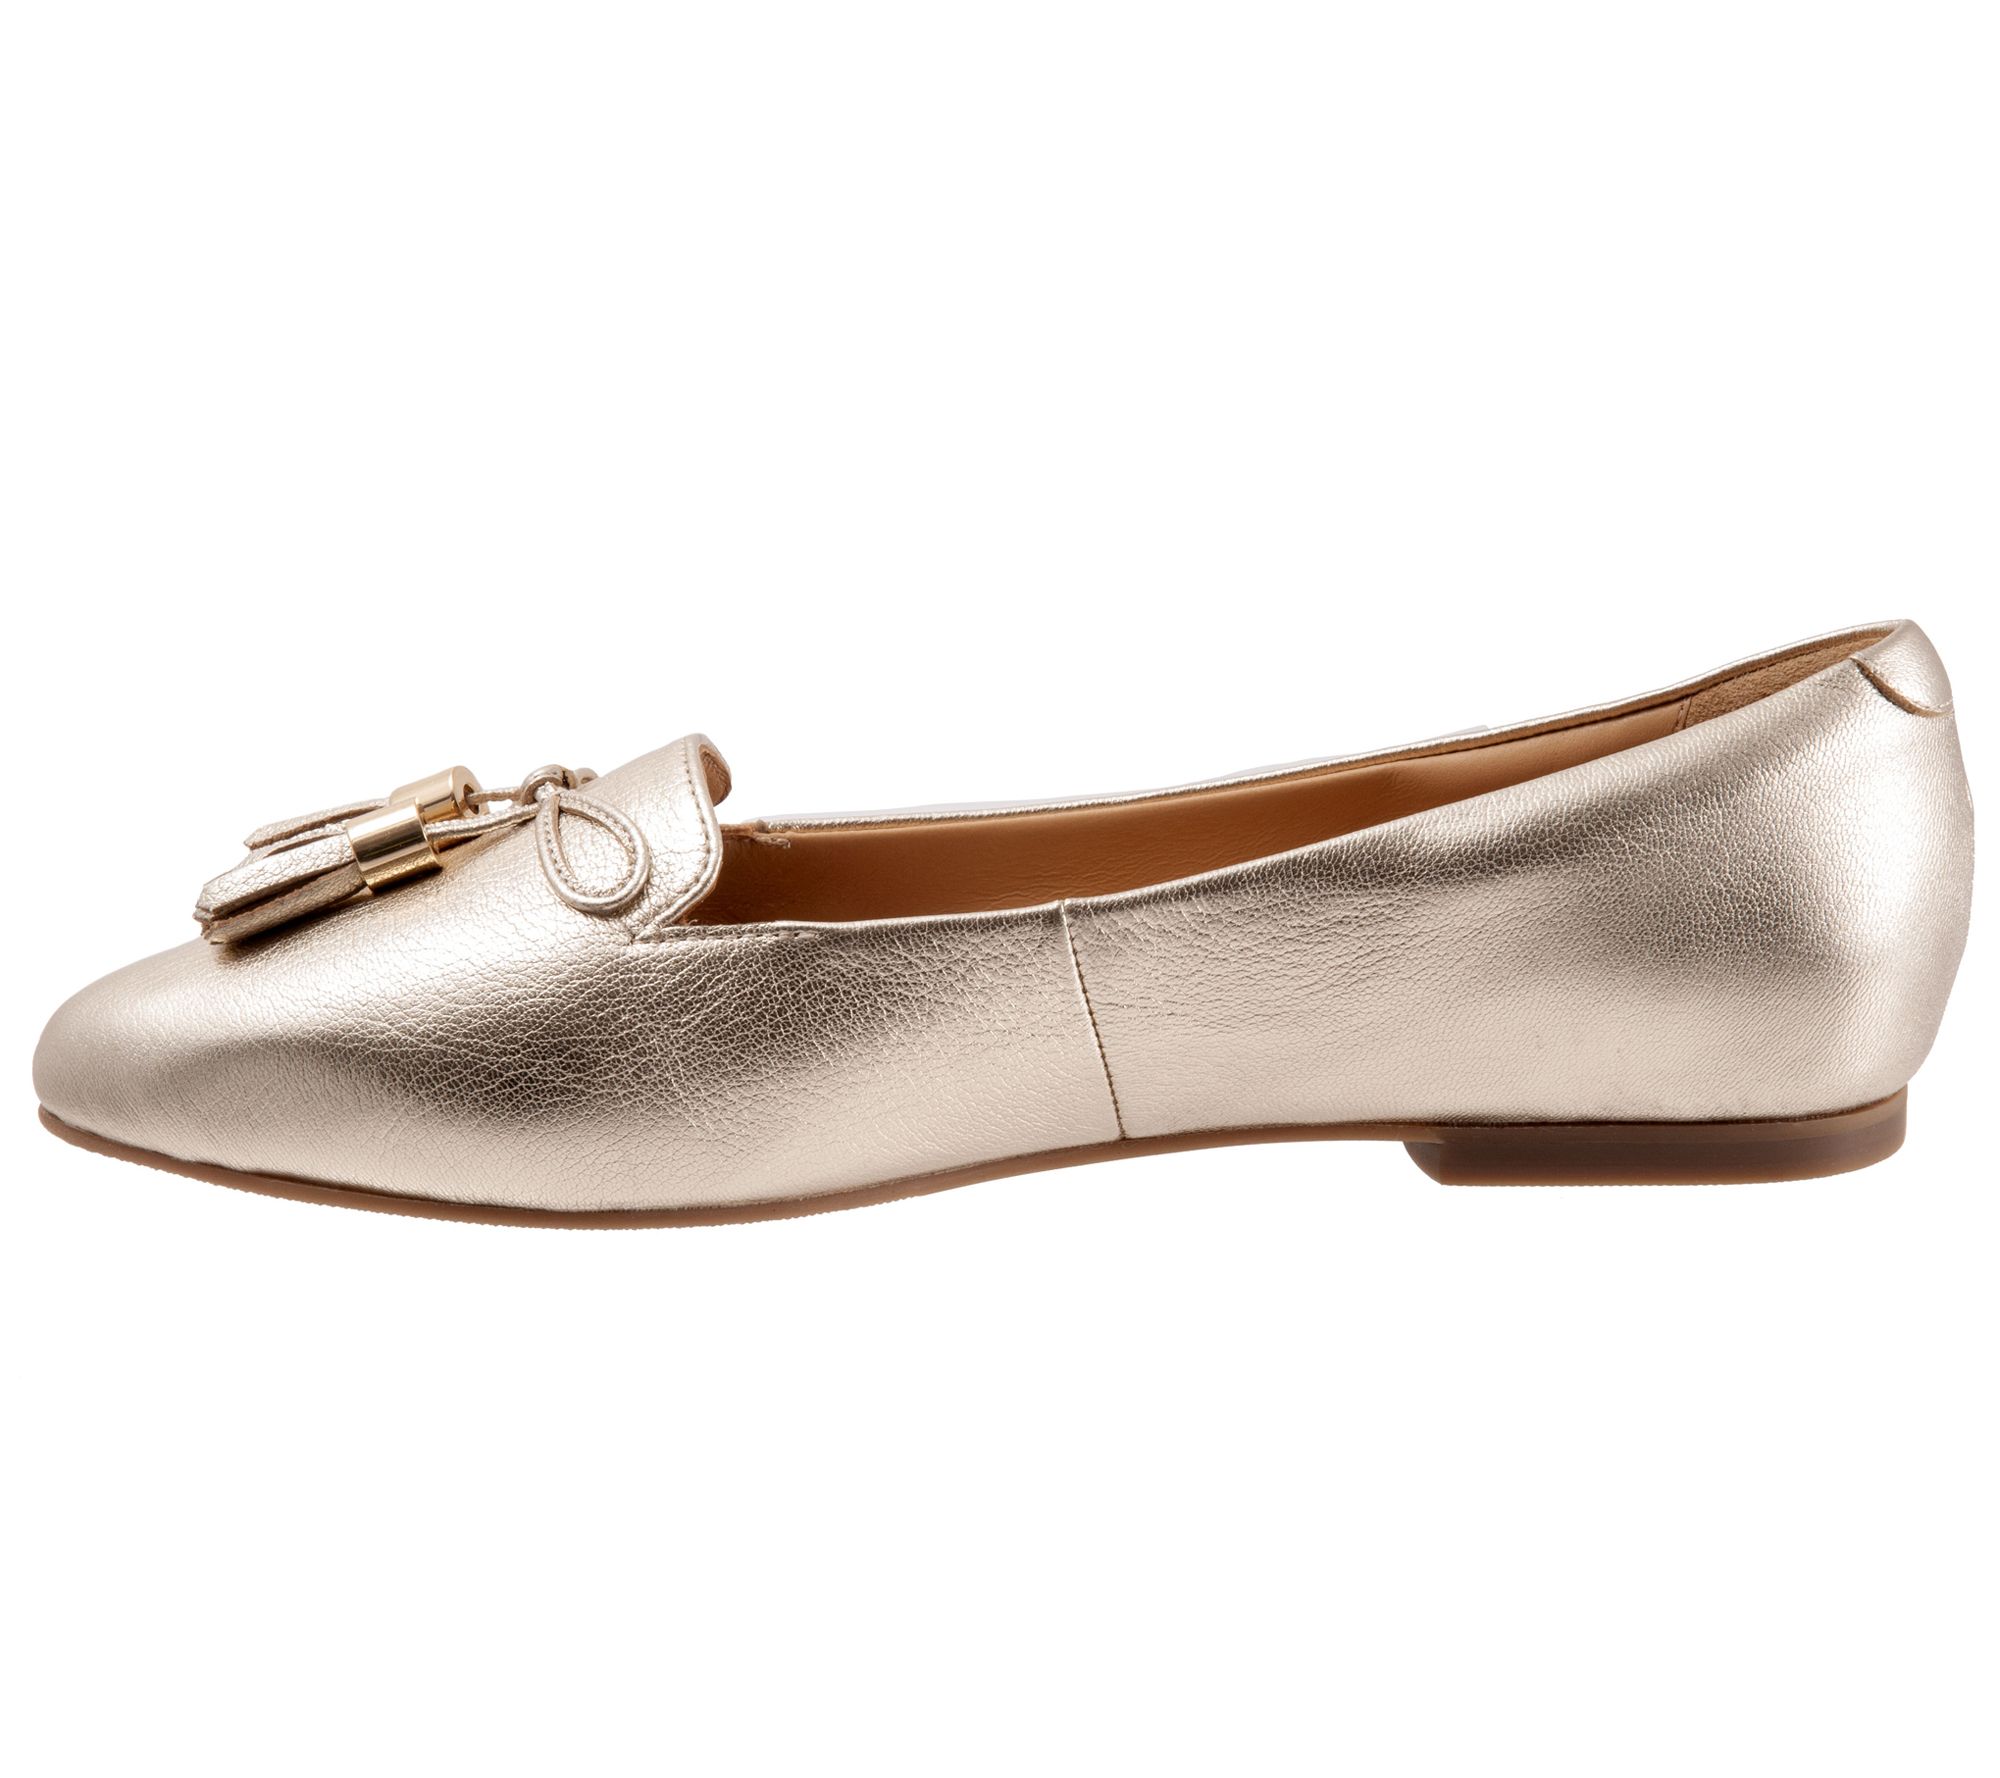 Trotters Pointy Toe Leather Loafers - Hope - QVC.com